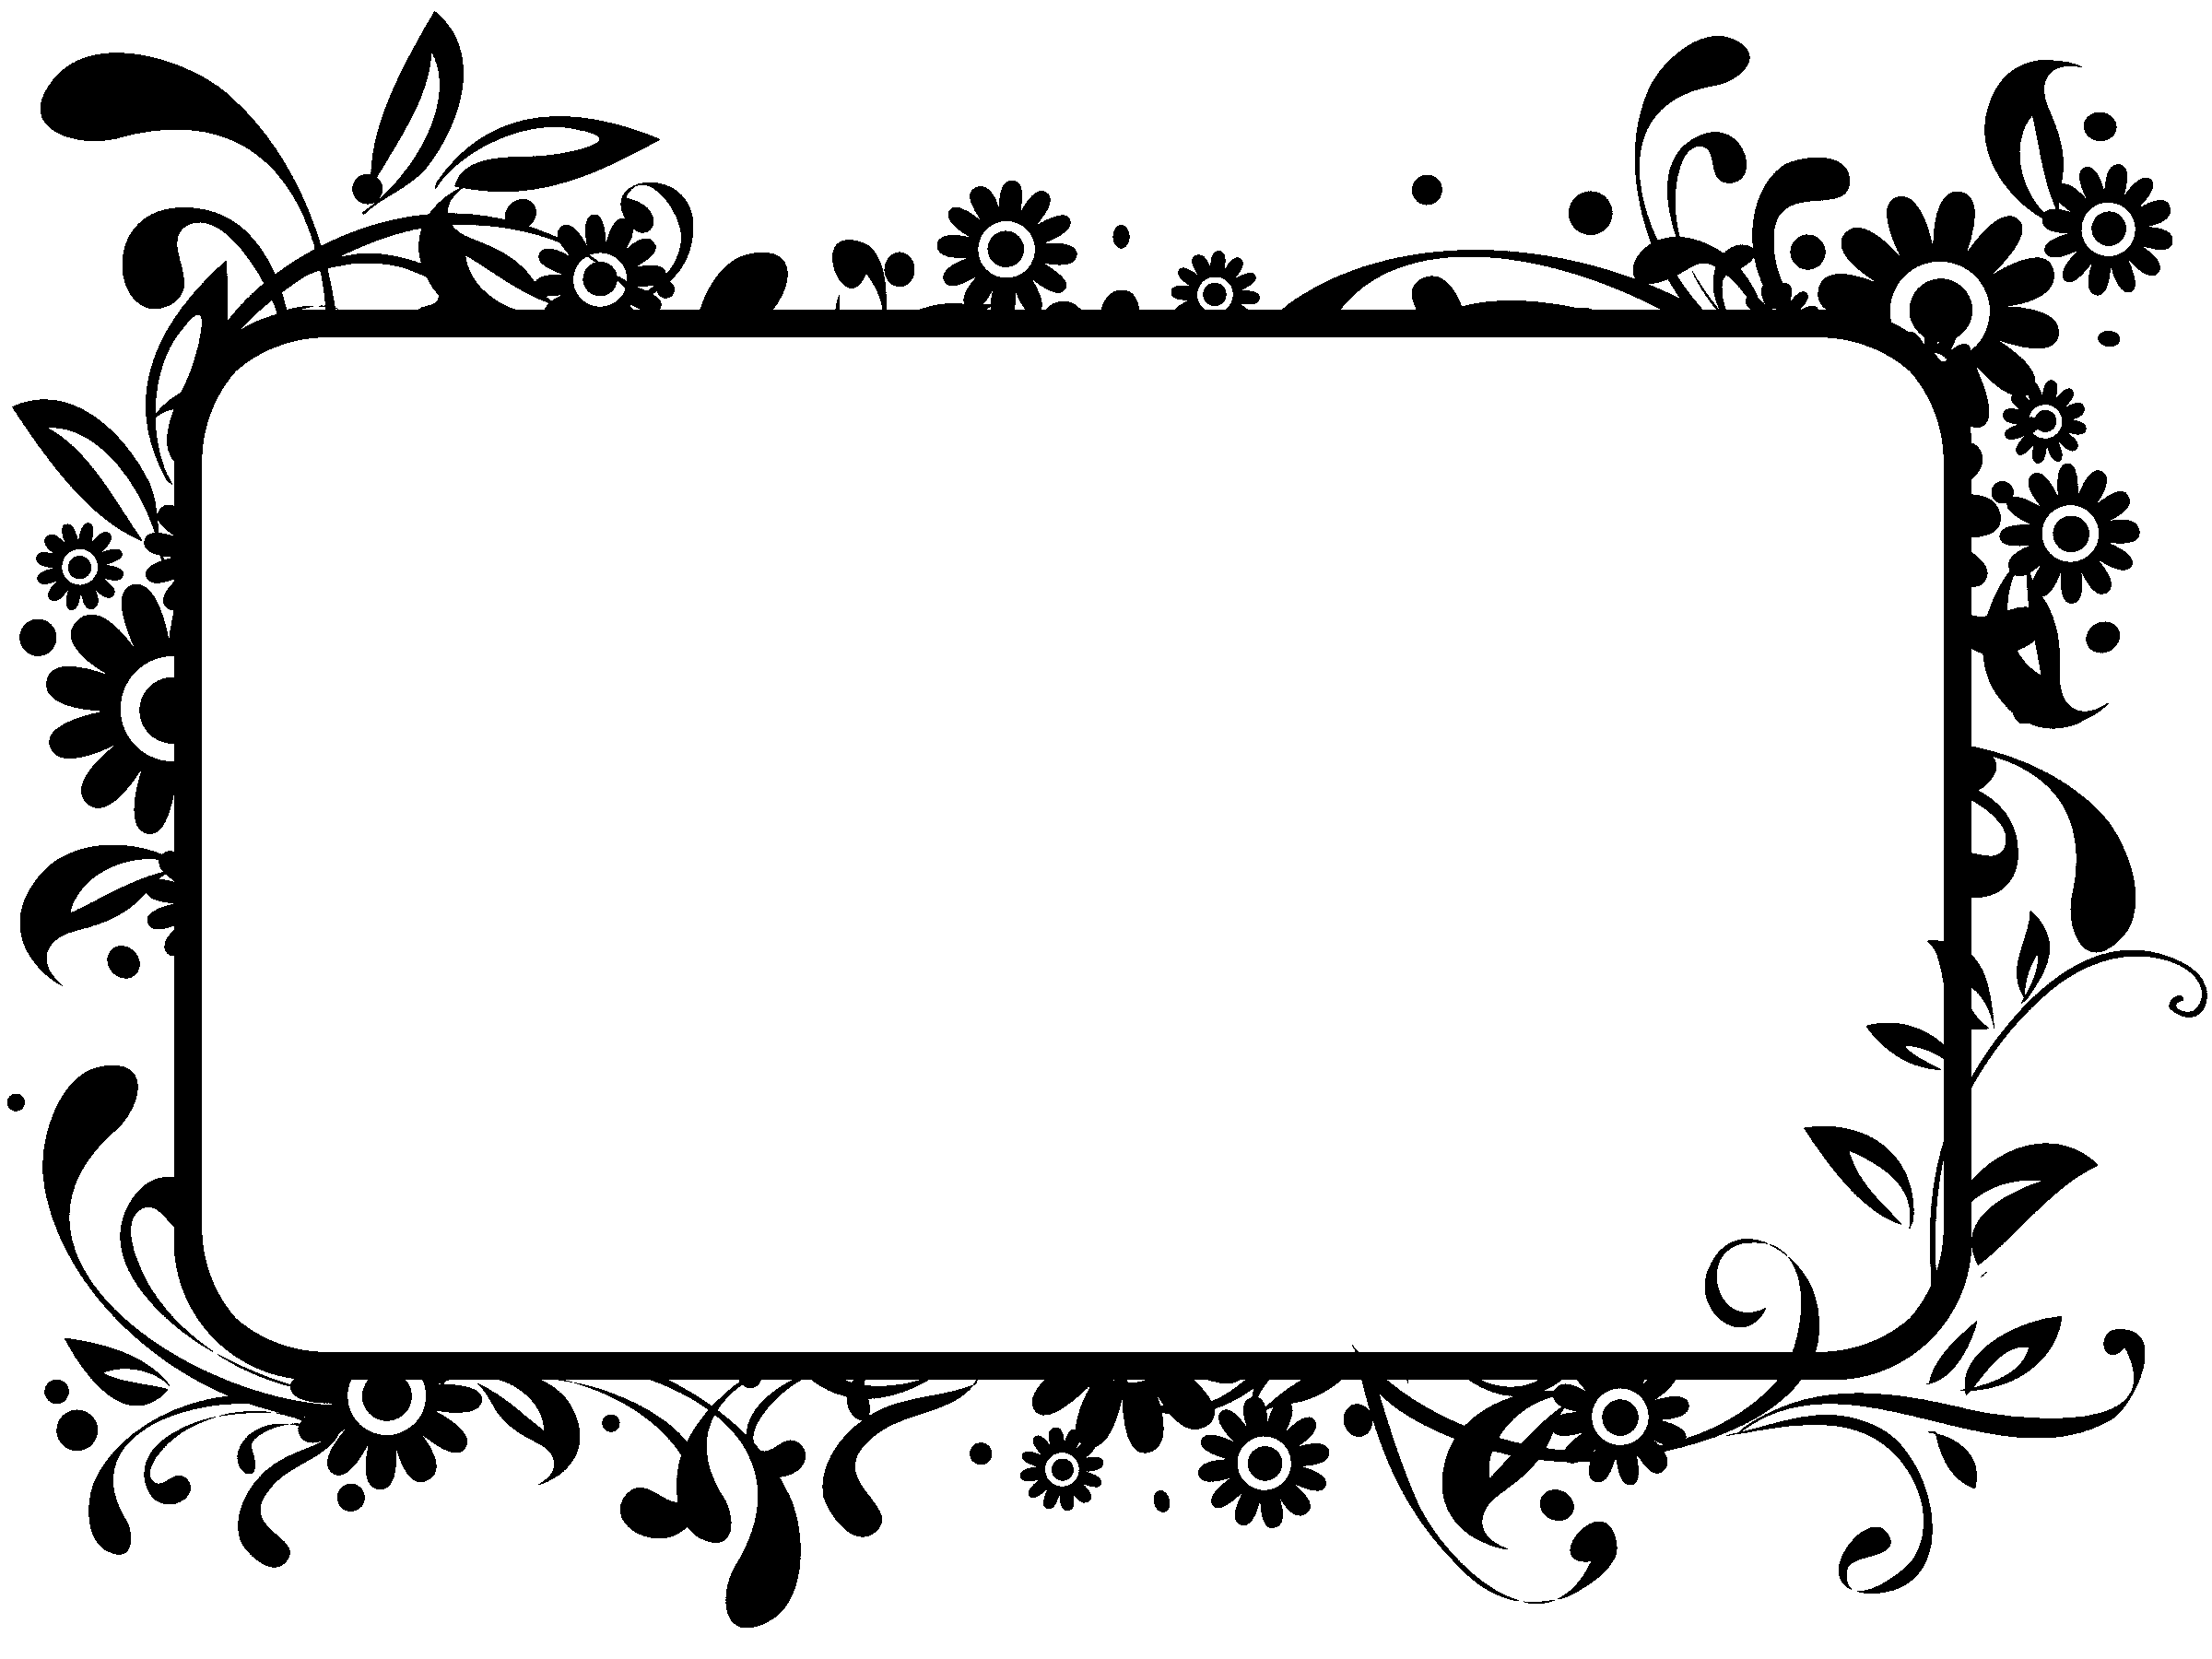 clipart frame free download - photo #46